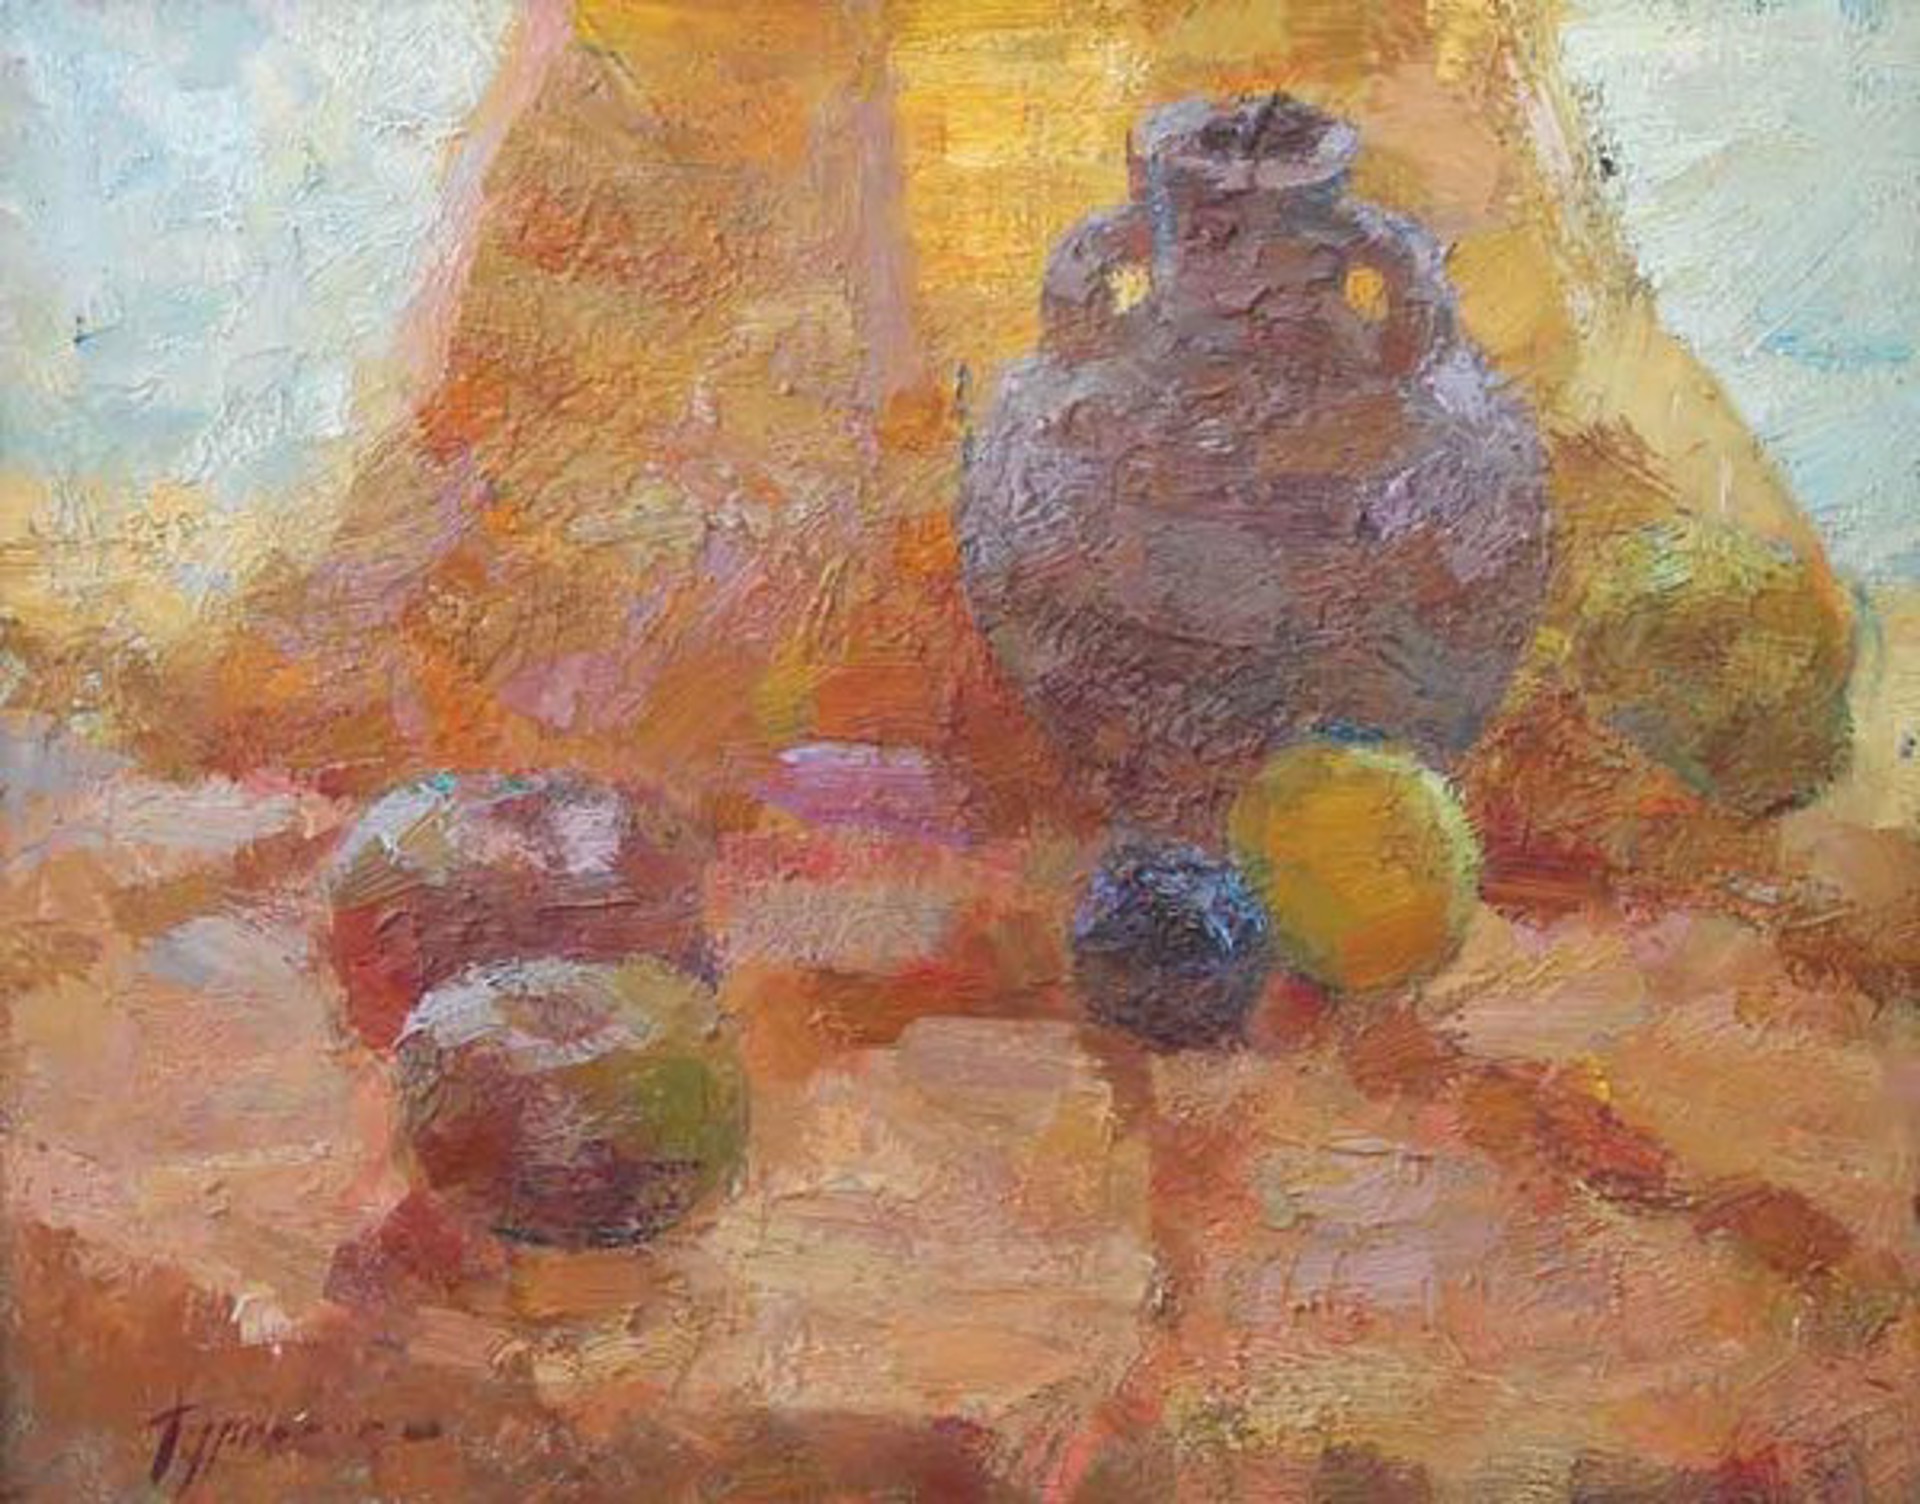 Still Life with Apples by Mikail Turpetko